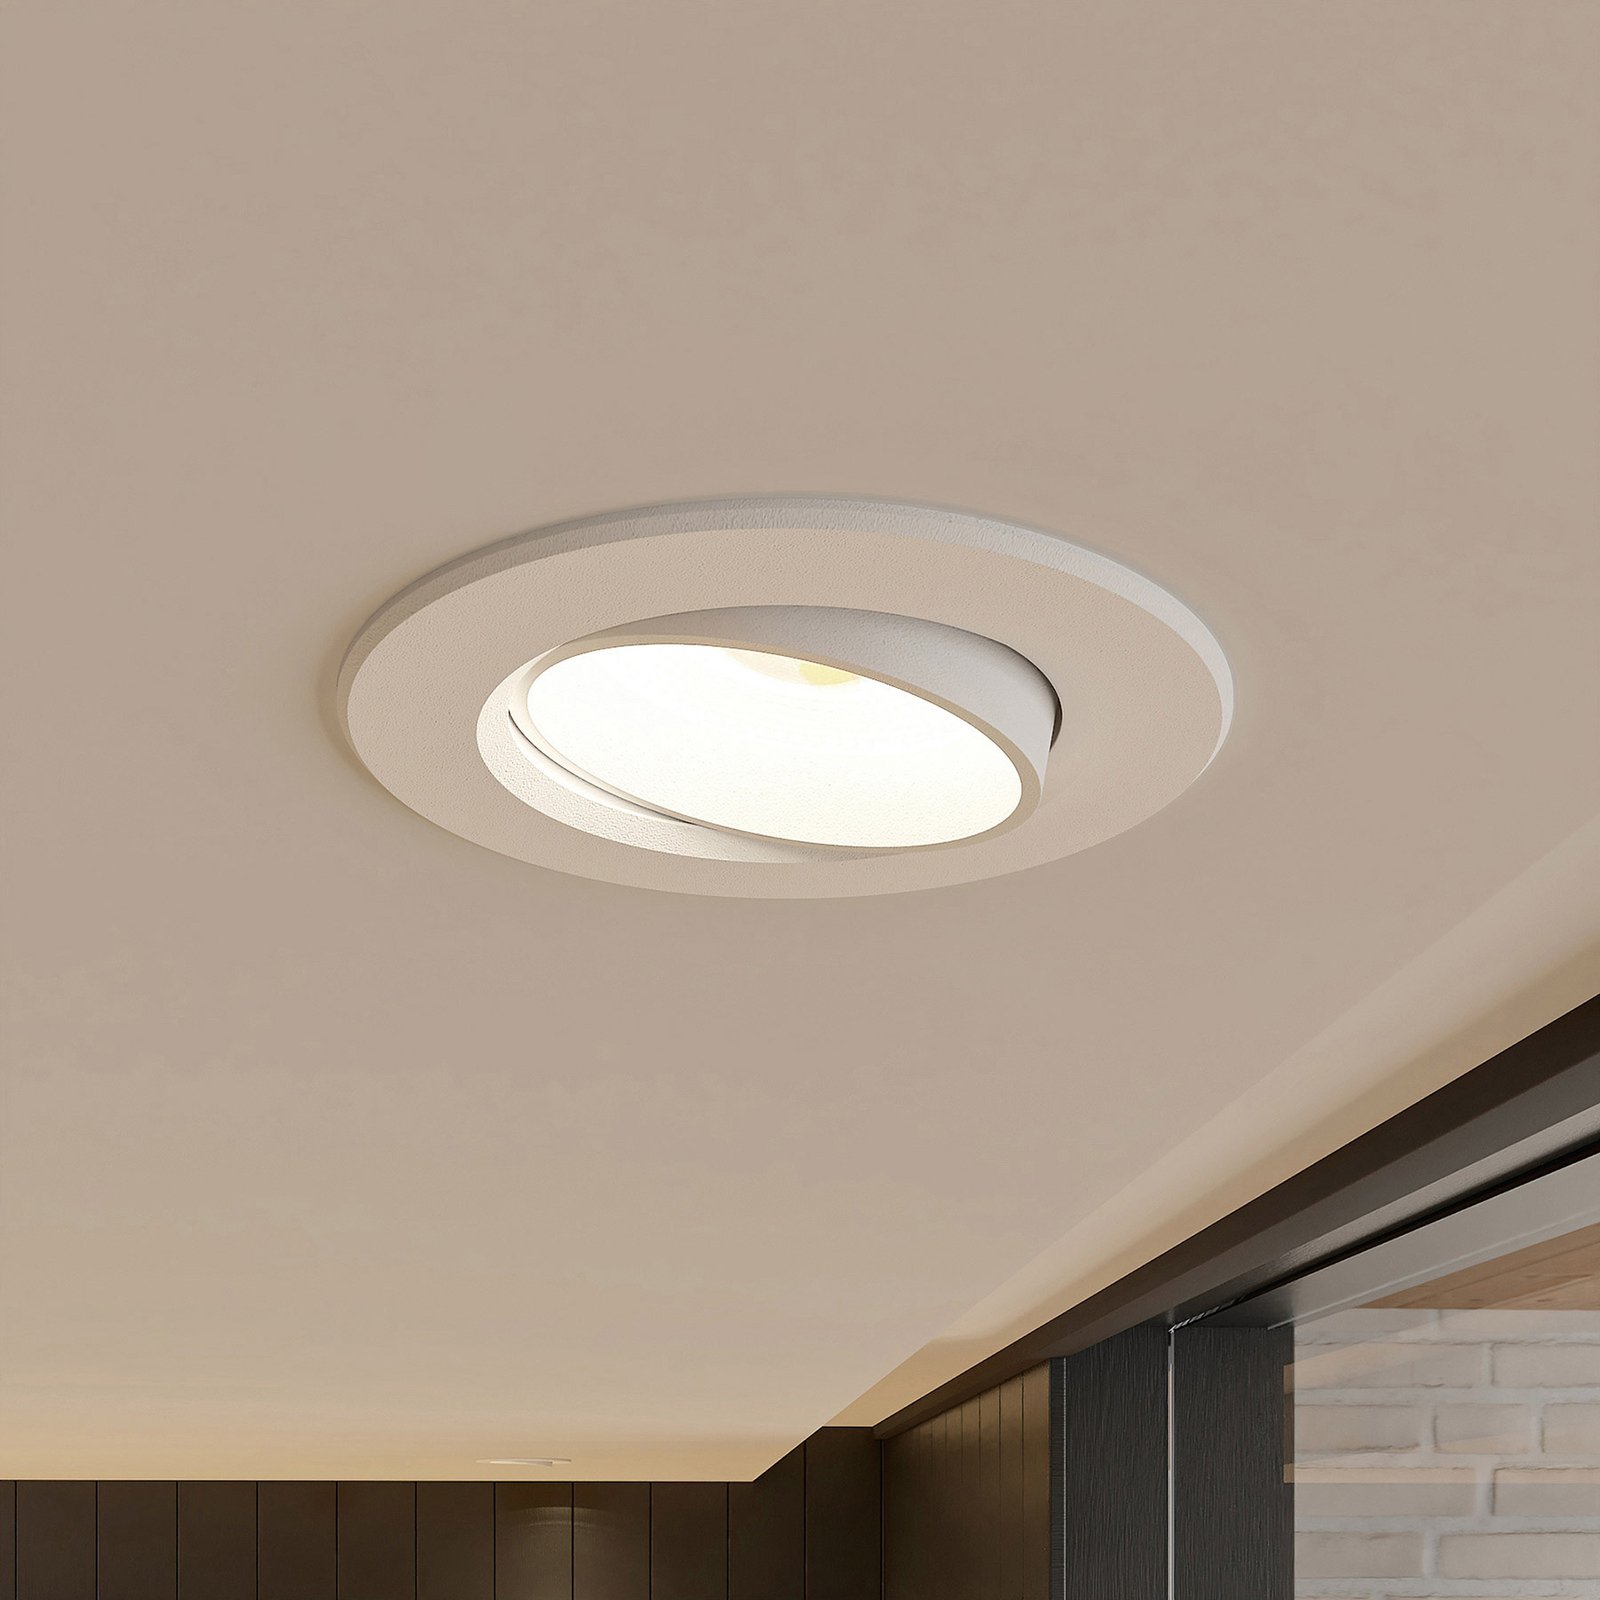 Prios LED recessed light Shima, white, 9W, 3000K, 2pcs, dimmable